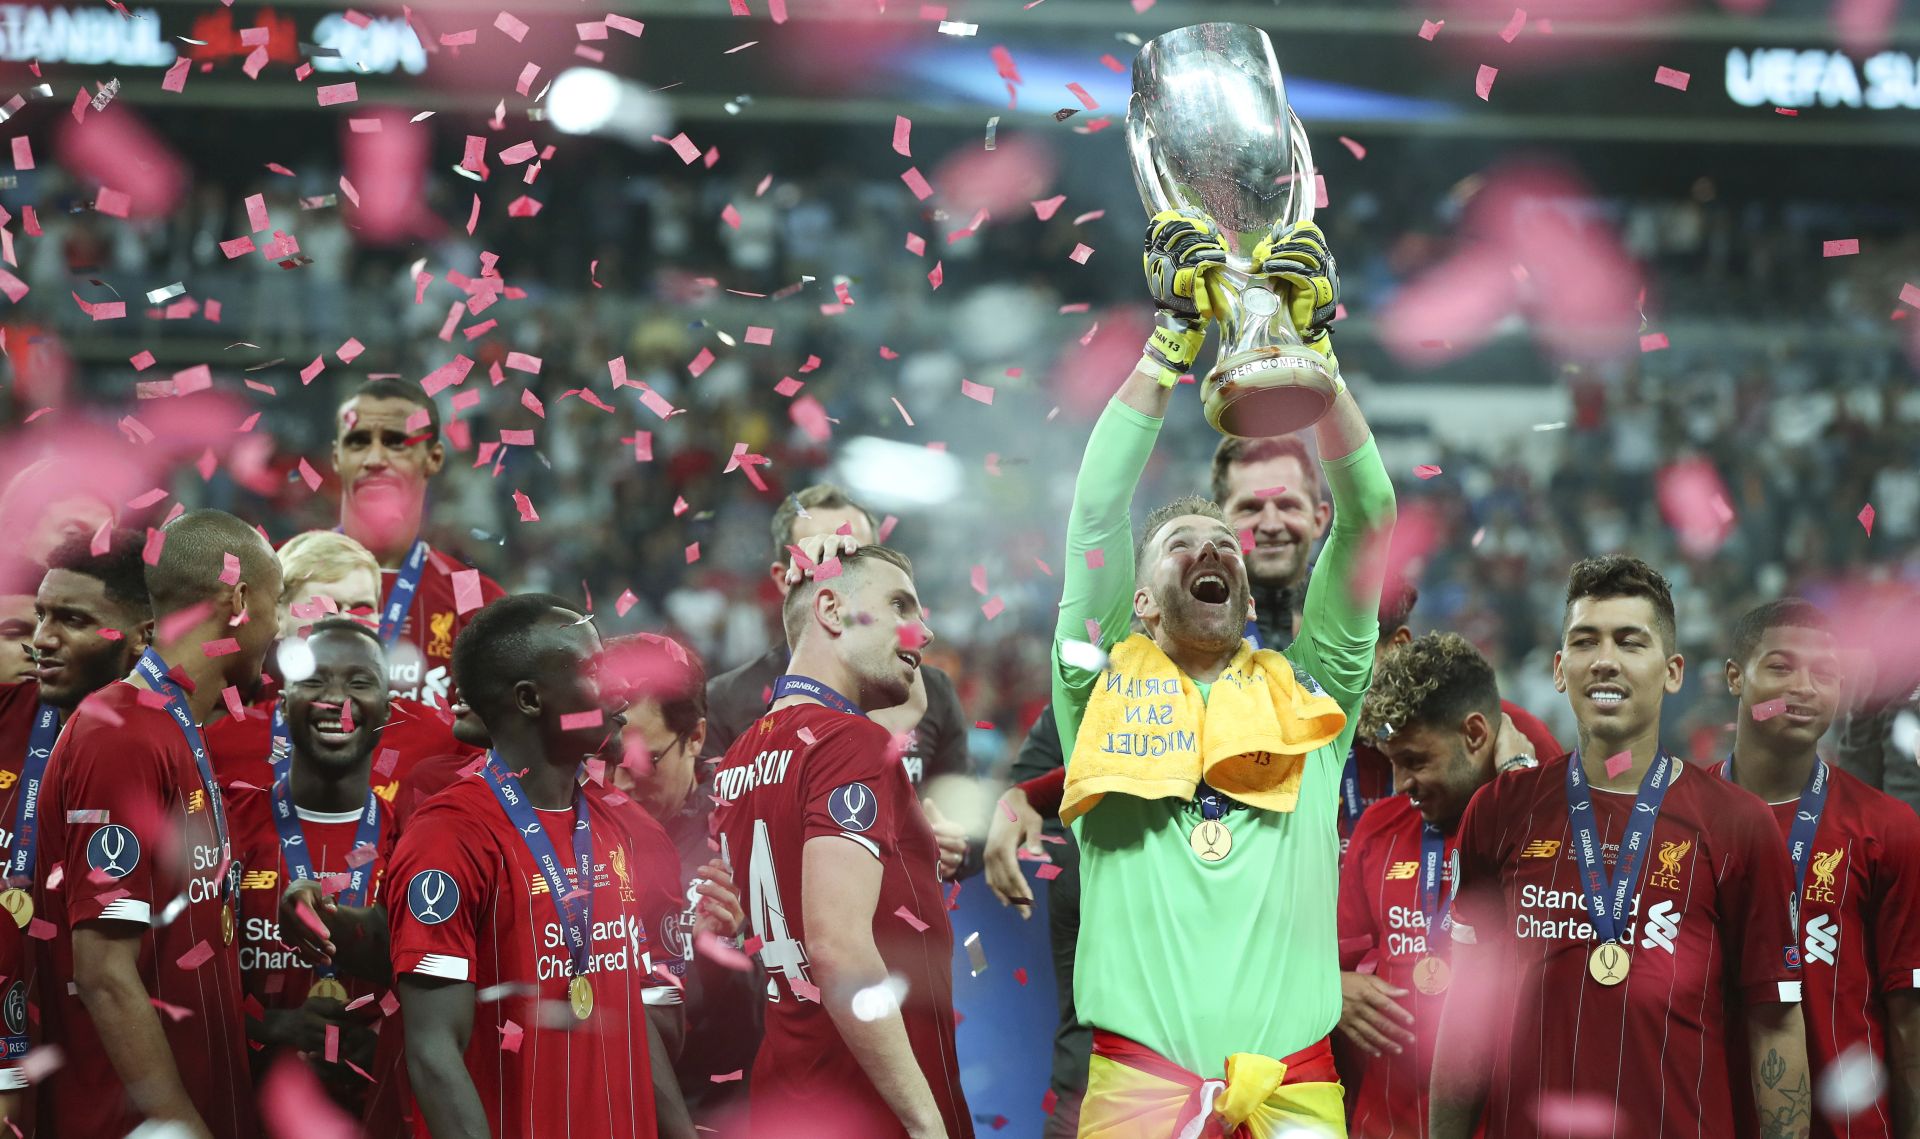 epa07773903 Liverpool's goalkeeper Adrian (C-R) lifts the trophy as his teammates celebrate after winning the UEFA Super Cup soccer match between Liverpool FC and Chelsea FC in Istanbul, Turkey, 14 August 2019.  EPA/TOLGA BOZOGLU